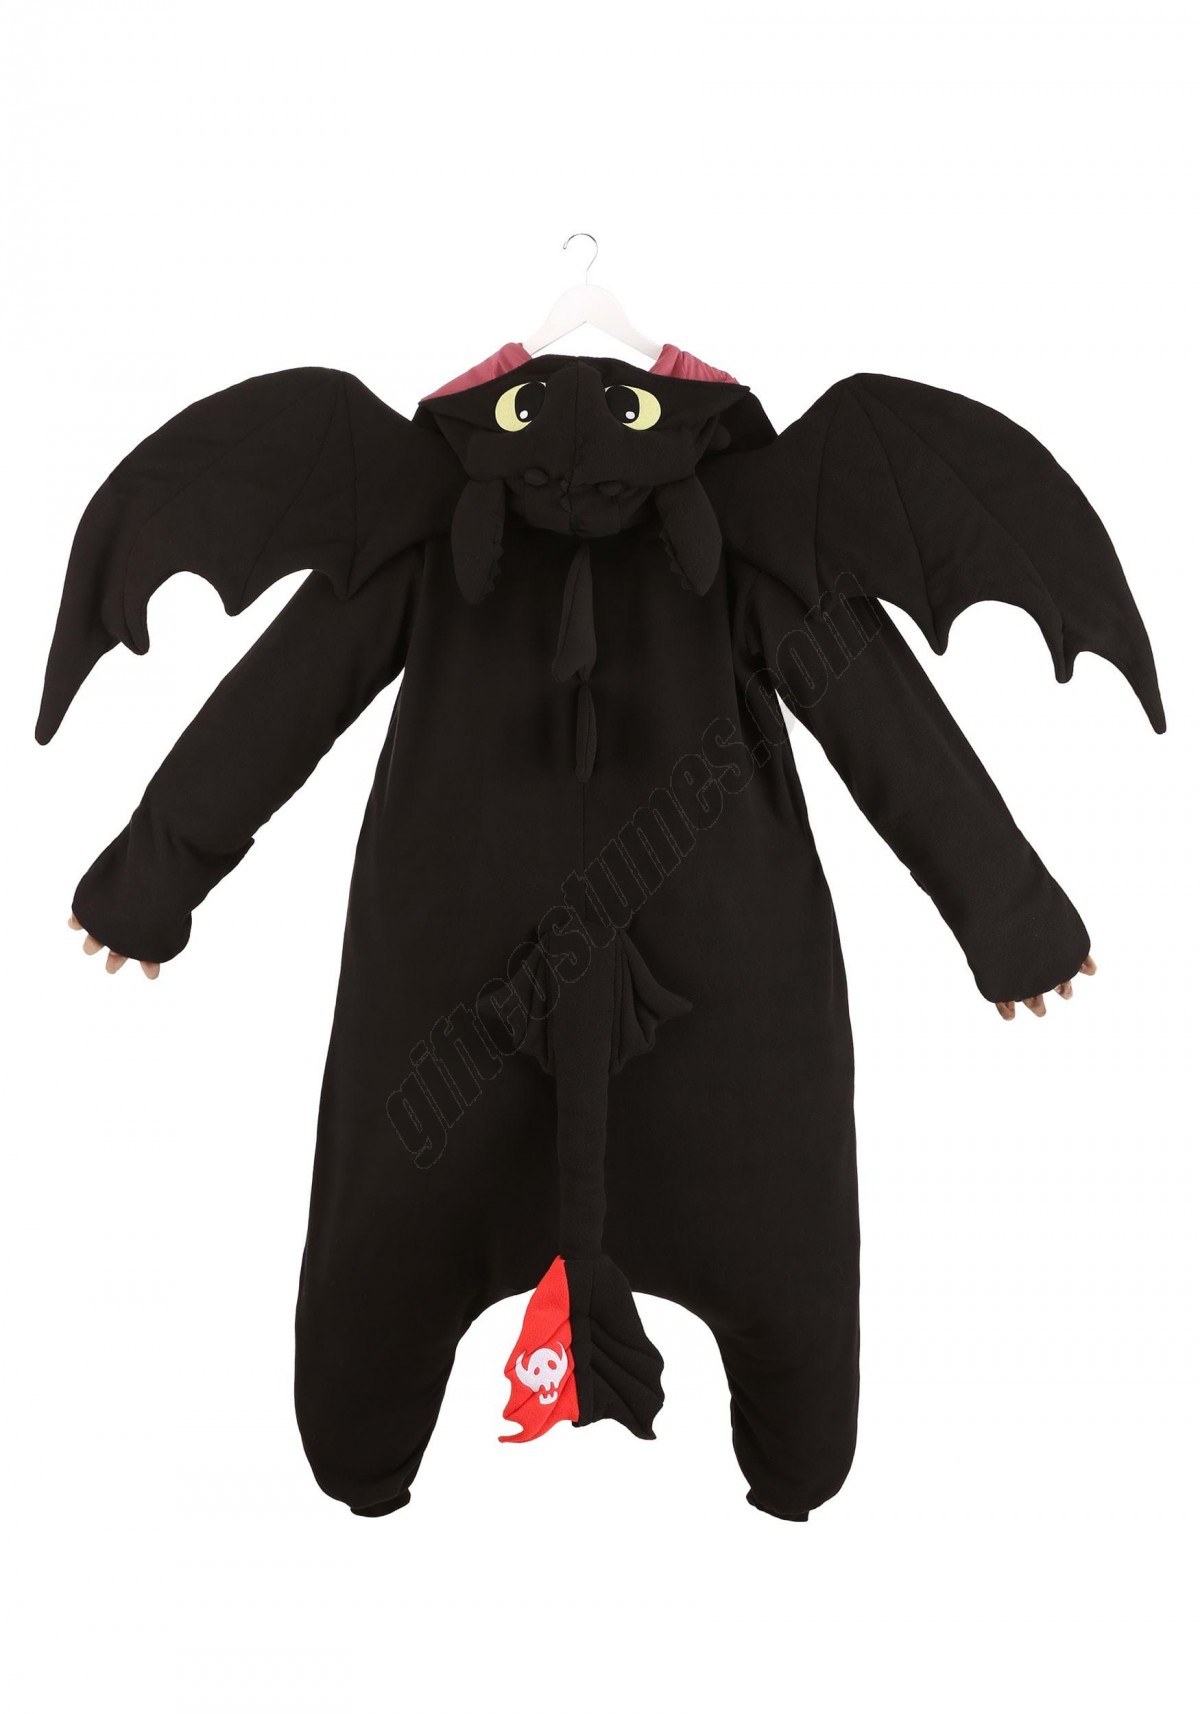 How to Train Your Dragon Toothless Adult Kigurumi Costume - Men's - -8